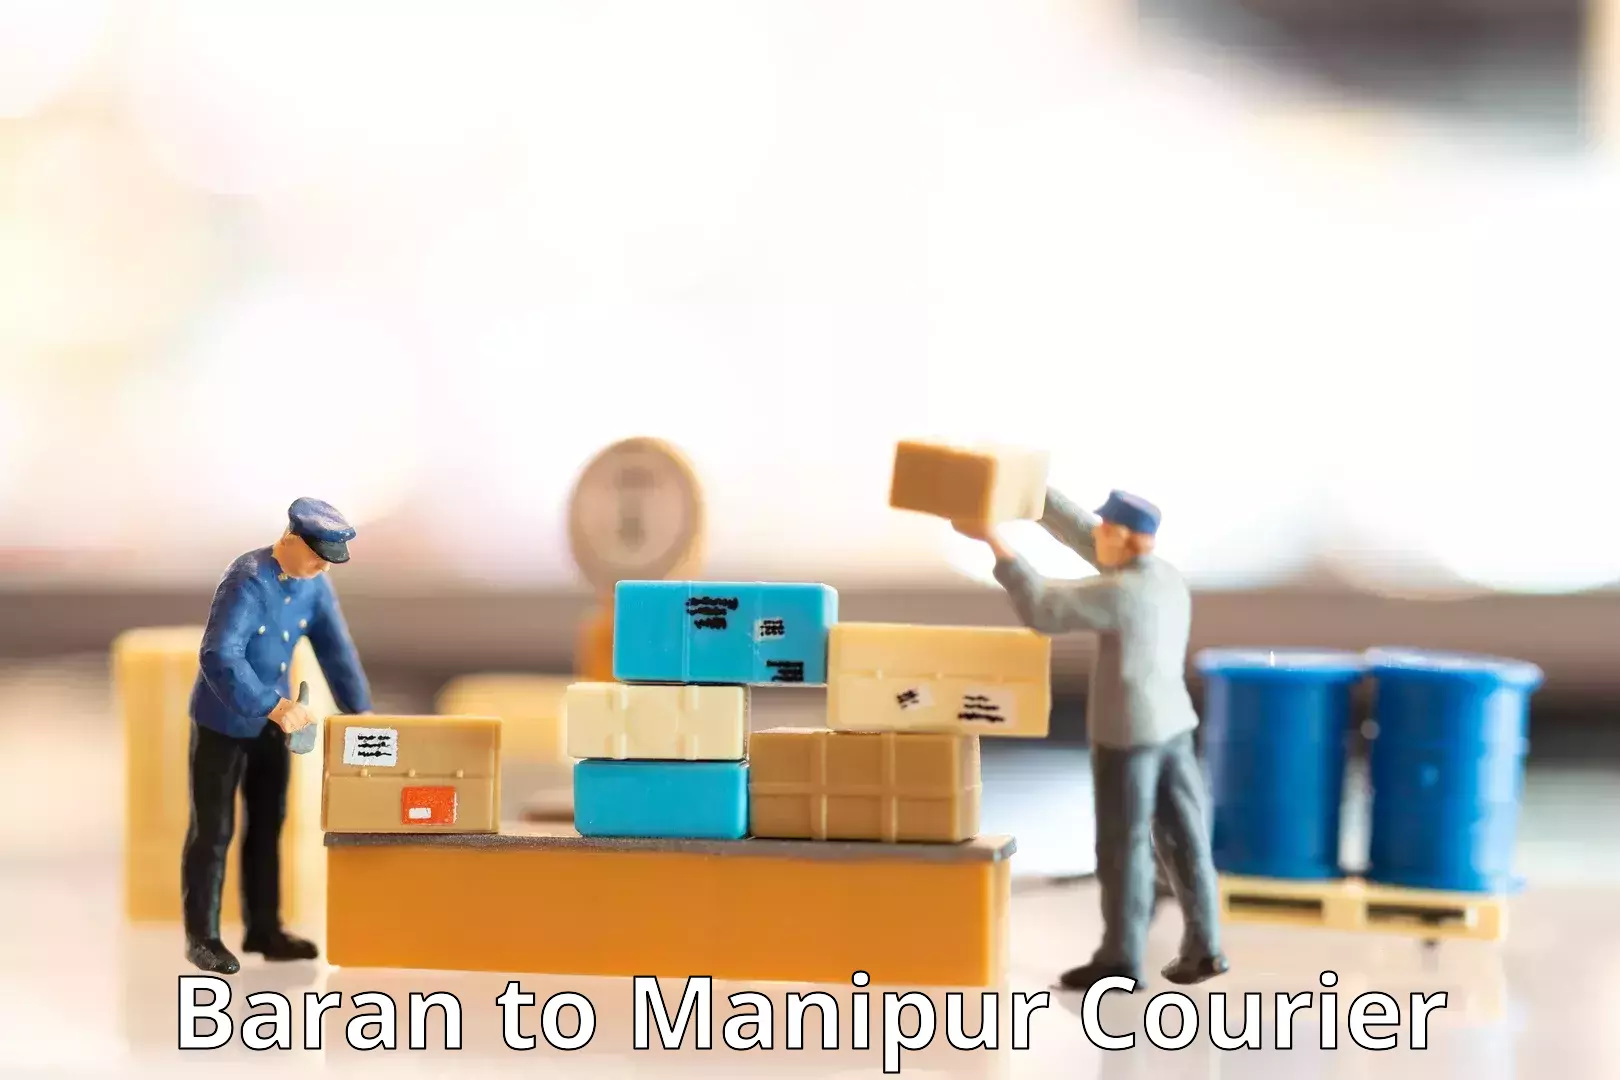 Enhanced tracking features in Baran to Manipur